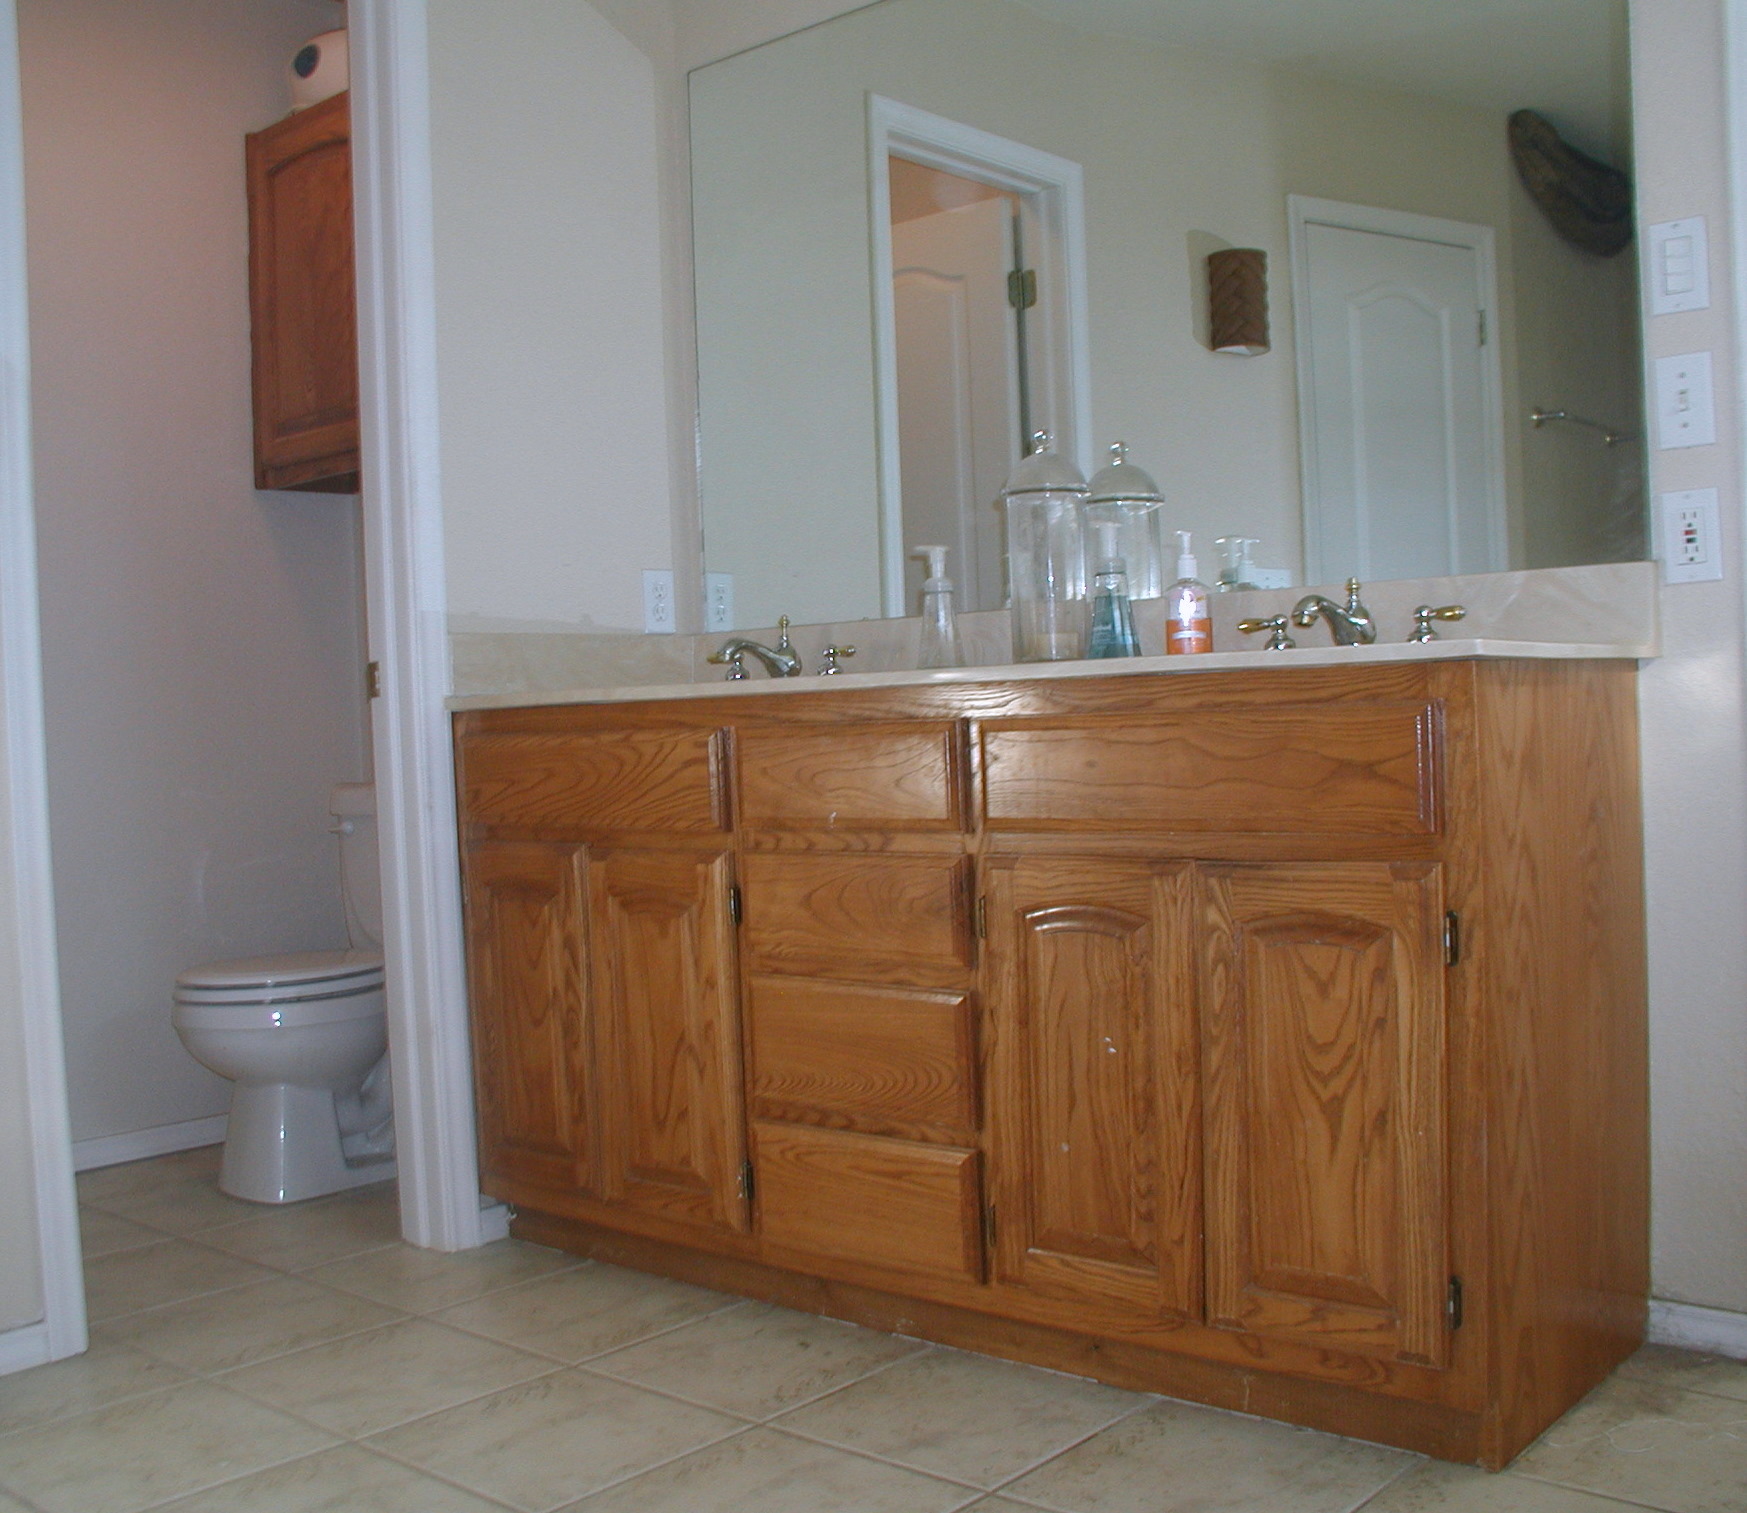 ADVICE ON HOW TO PAINT BATHROOM SINK CABINETS - WELCOME TO THE